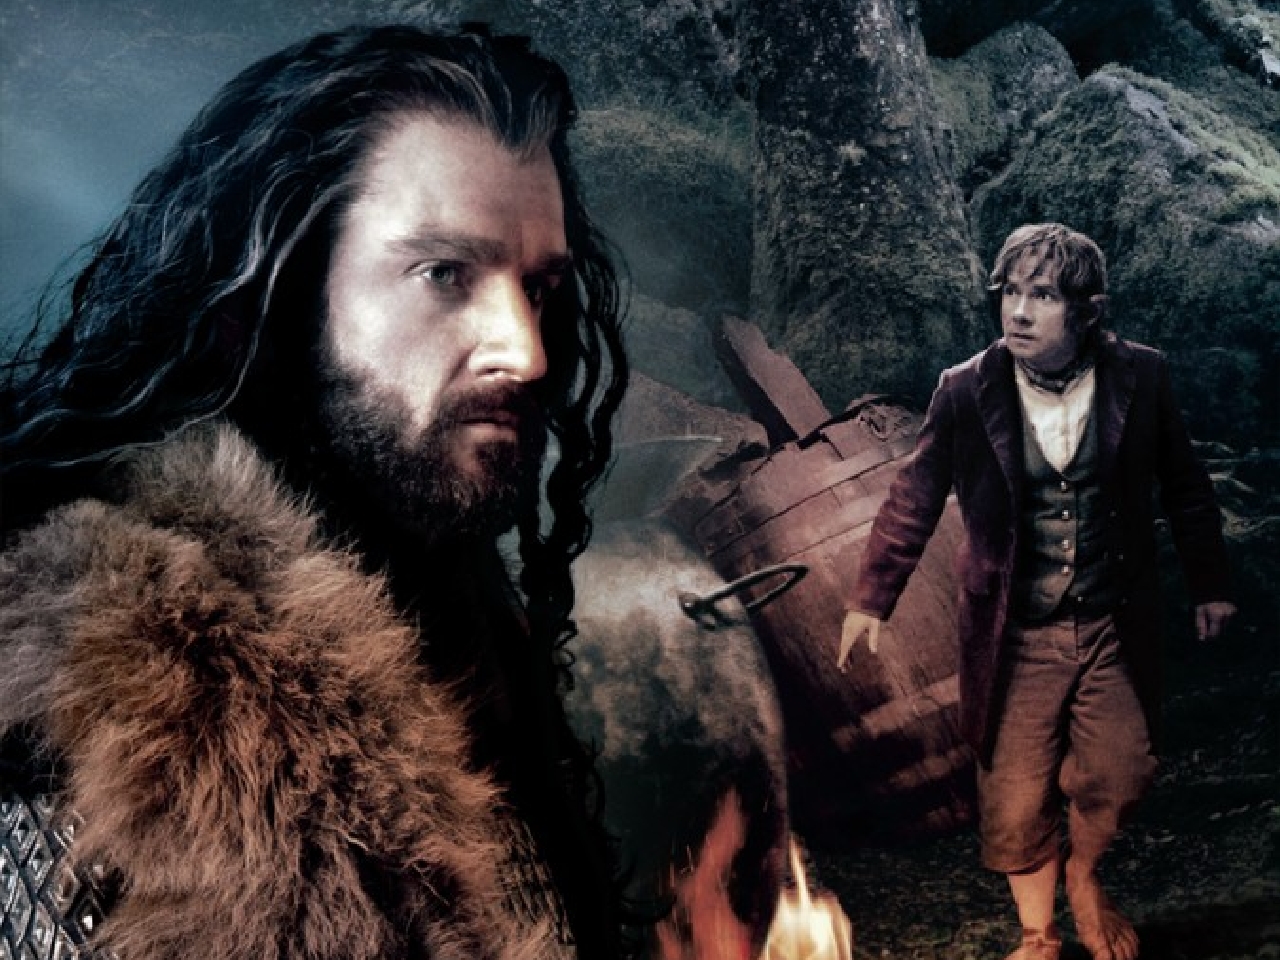 The Hobbit: An Unexpected Journey for mac instal free